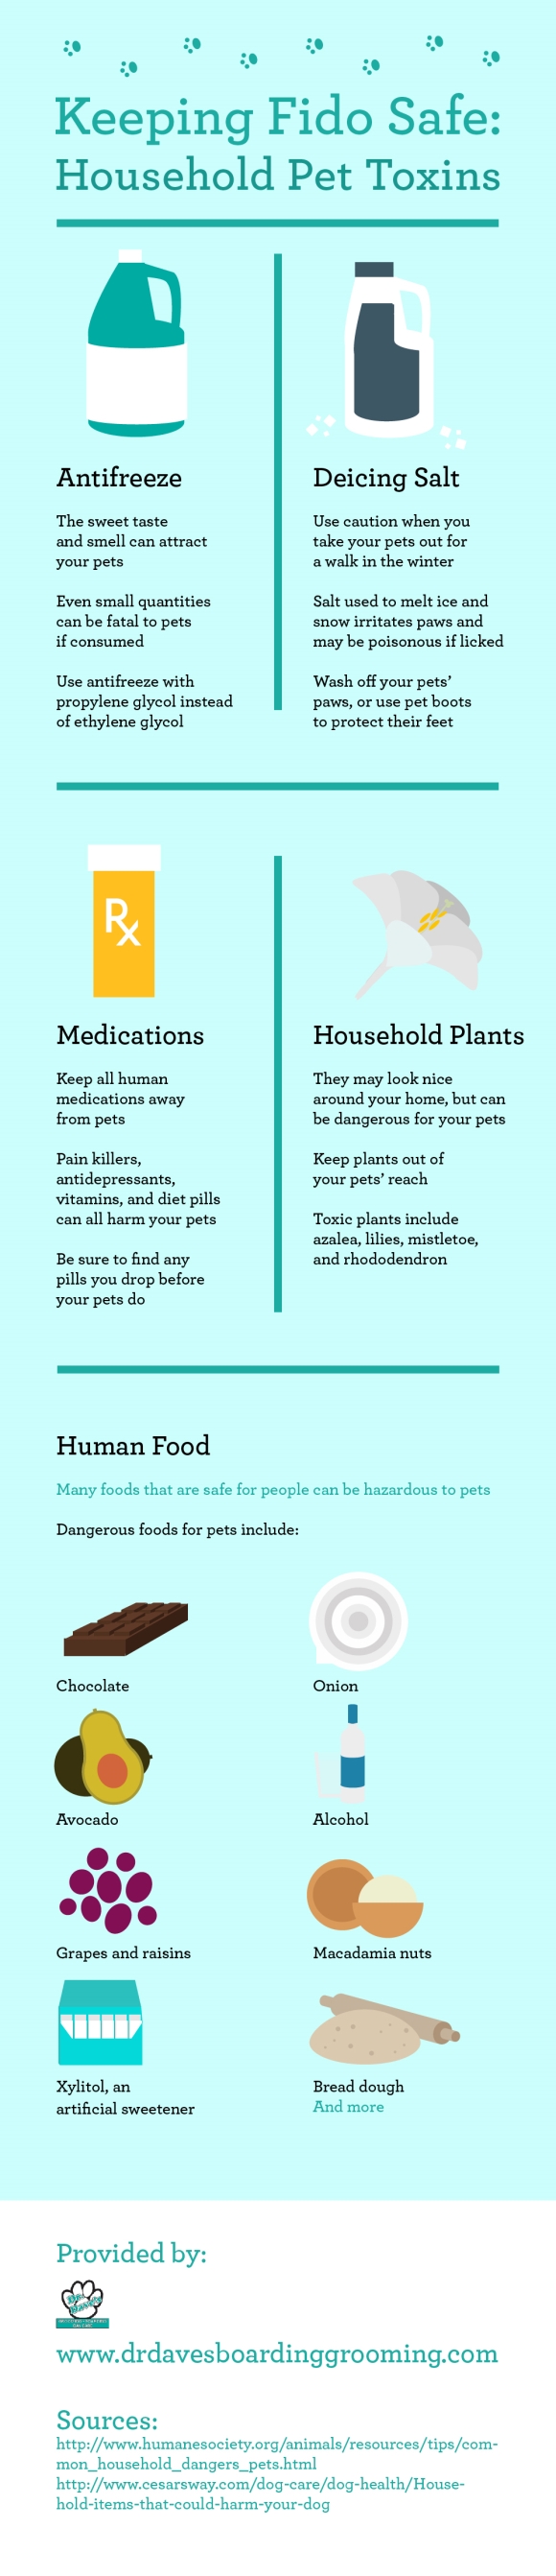 Keeping Fido Safe Household Pet Toxins Infographic in San Jose